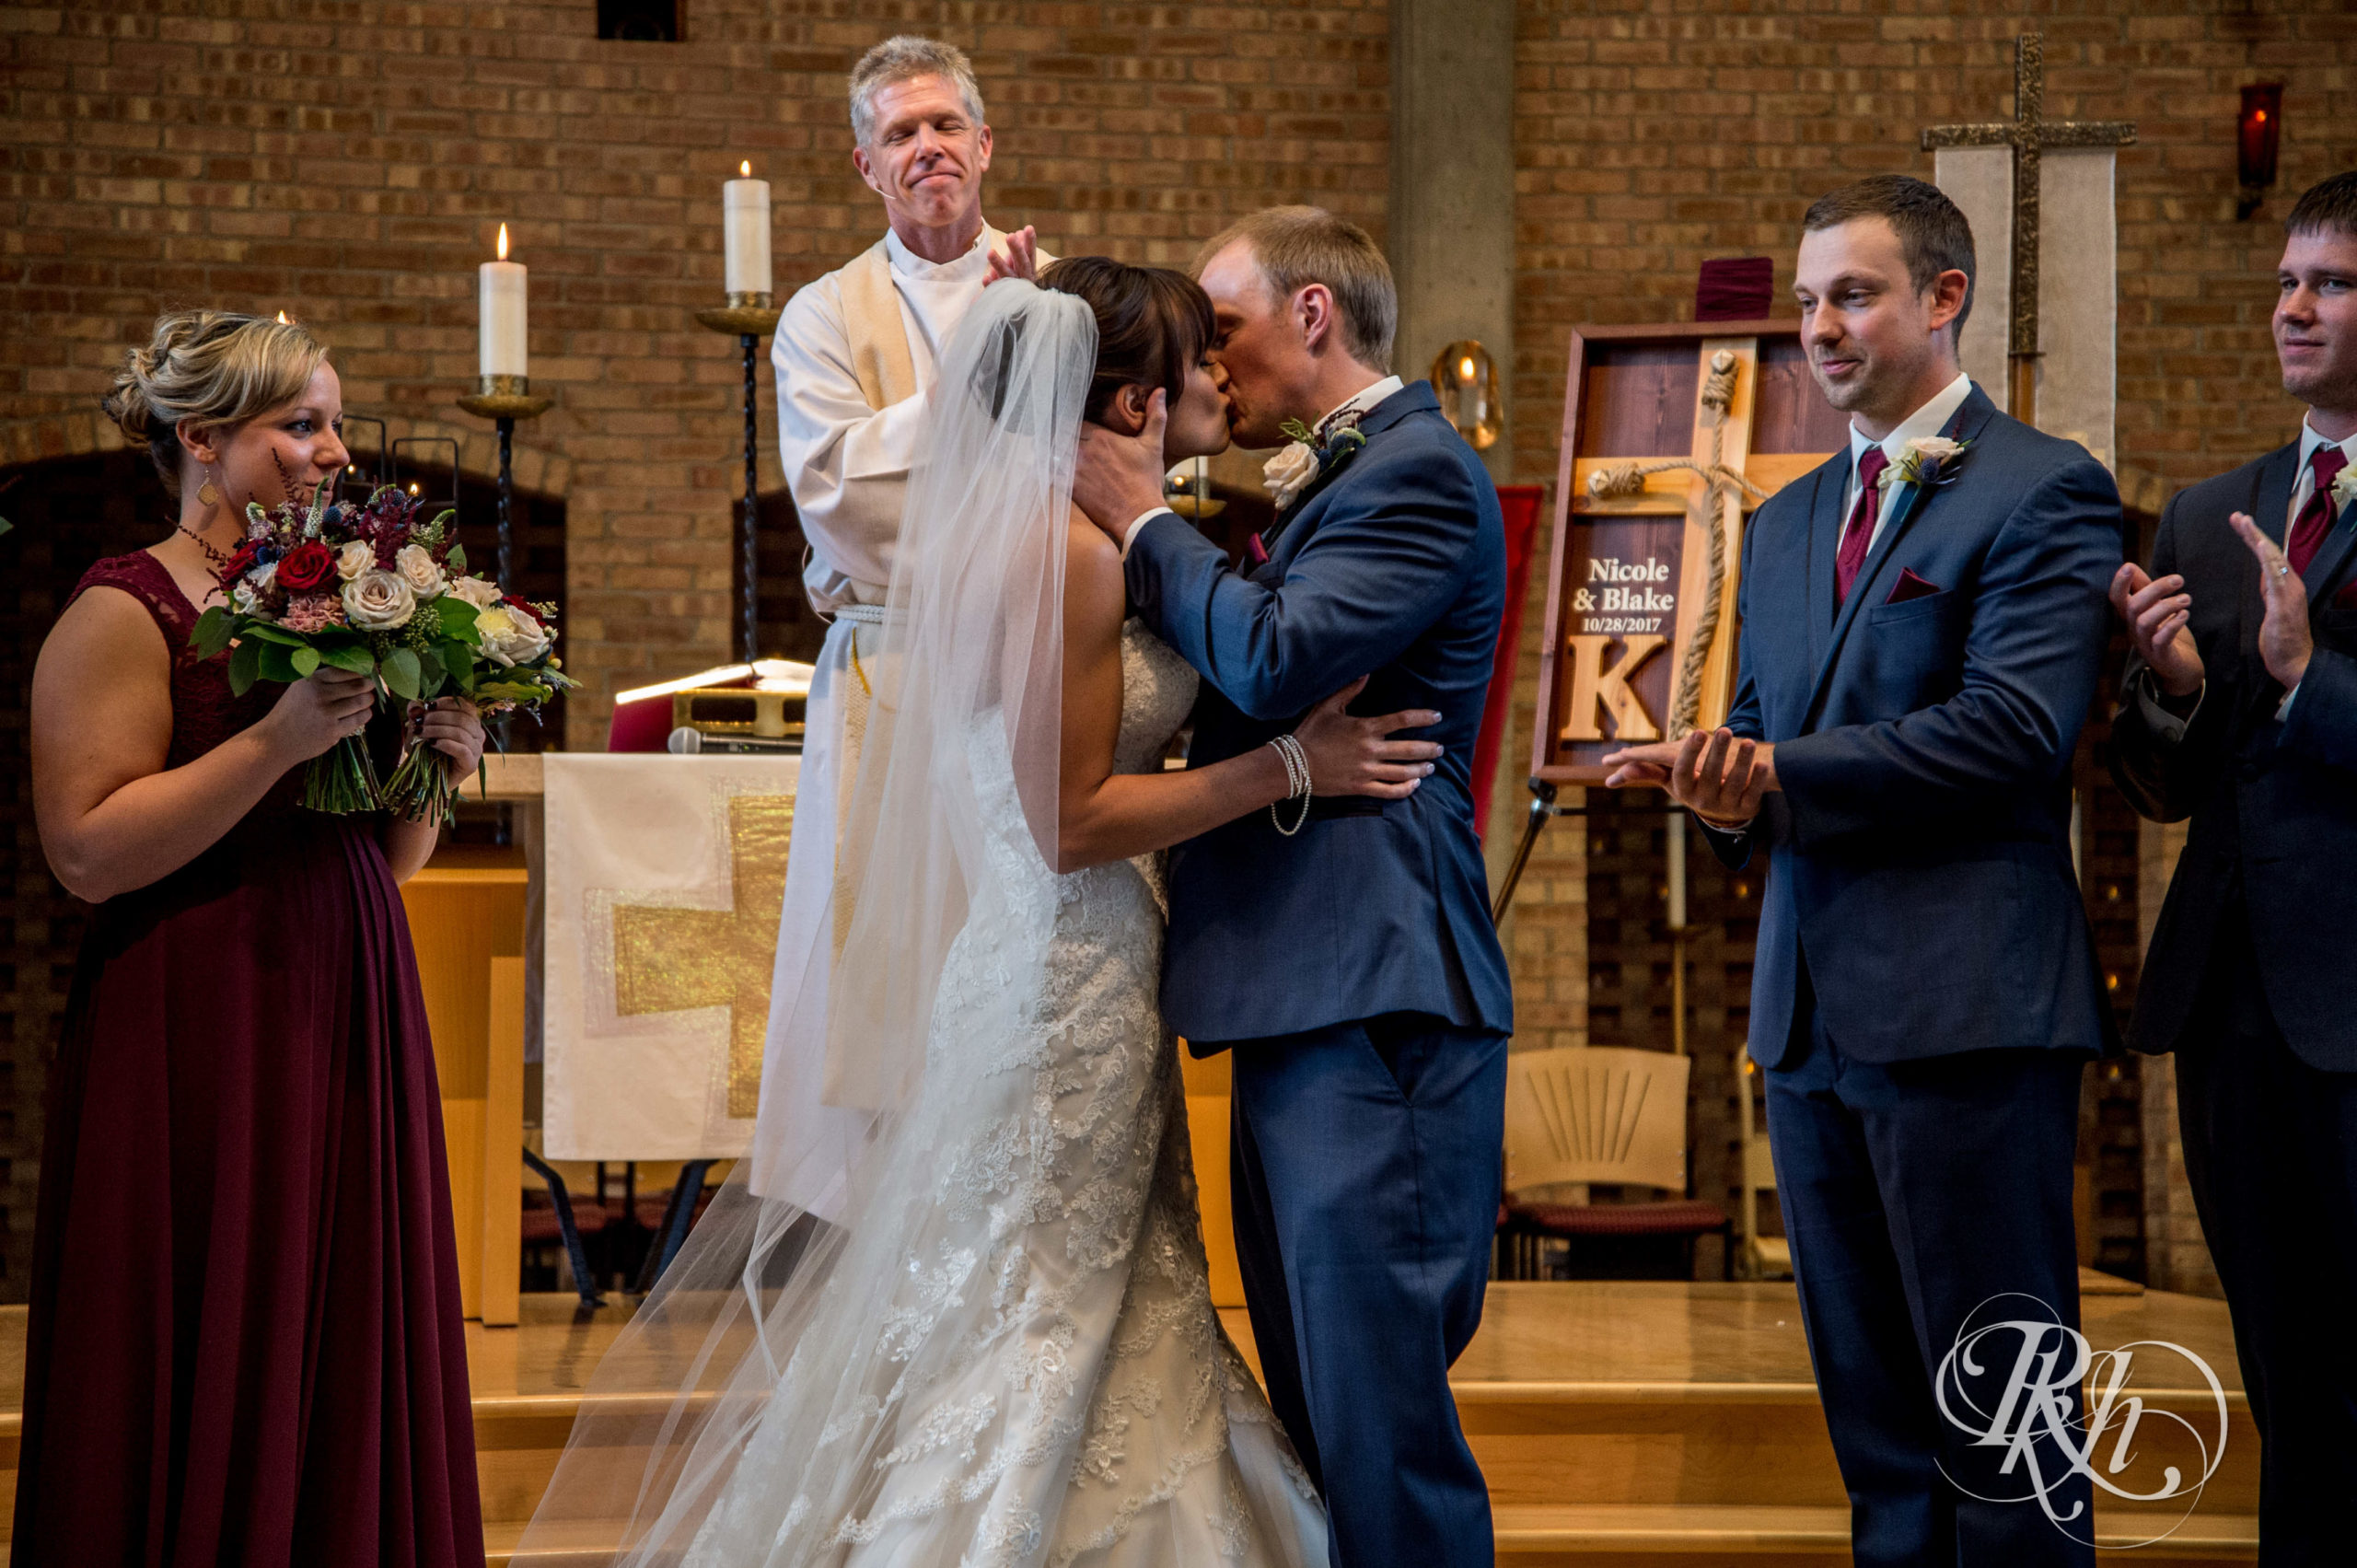 Bride and groom kiss at church wedding ceremony in Minneapolis, Minnesota.